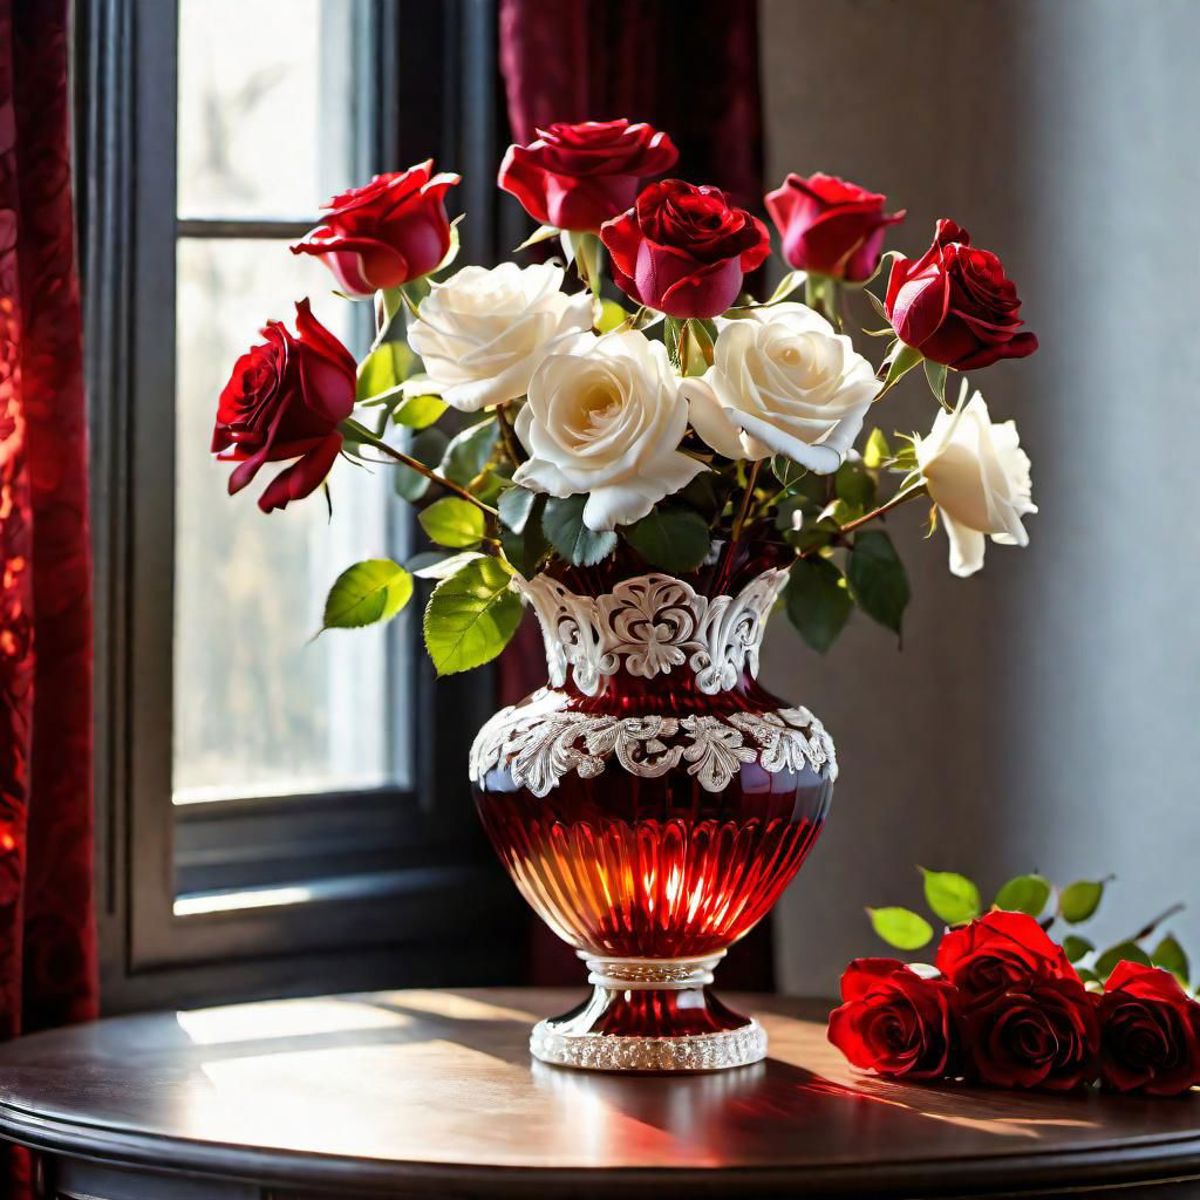 A vase filled with red and white roses sitting on a table.